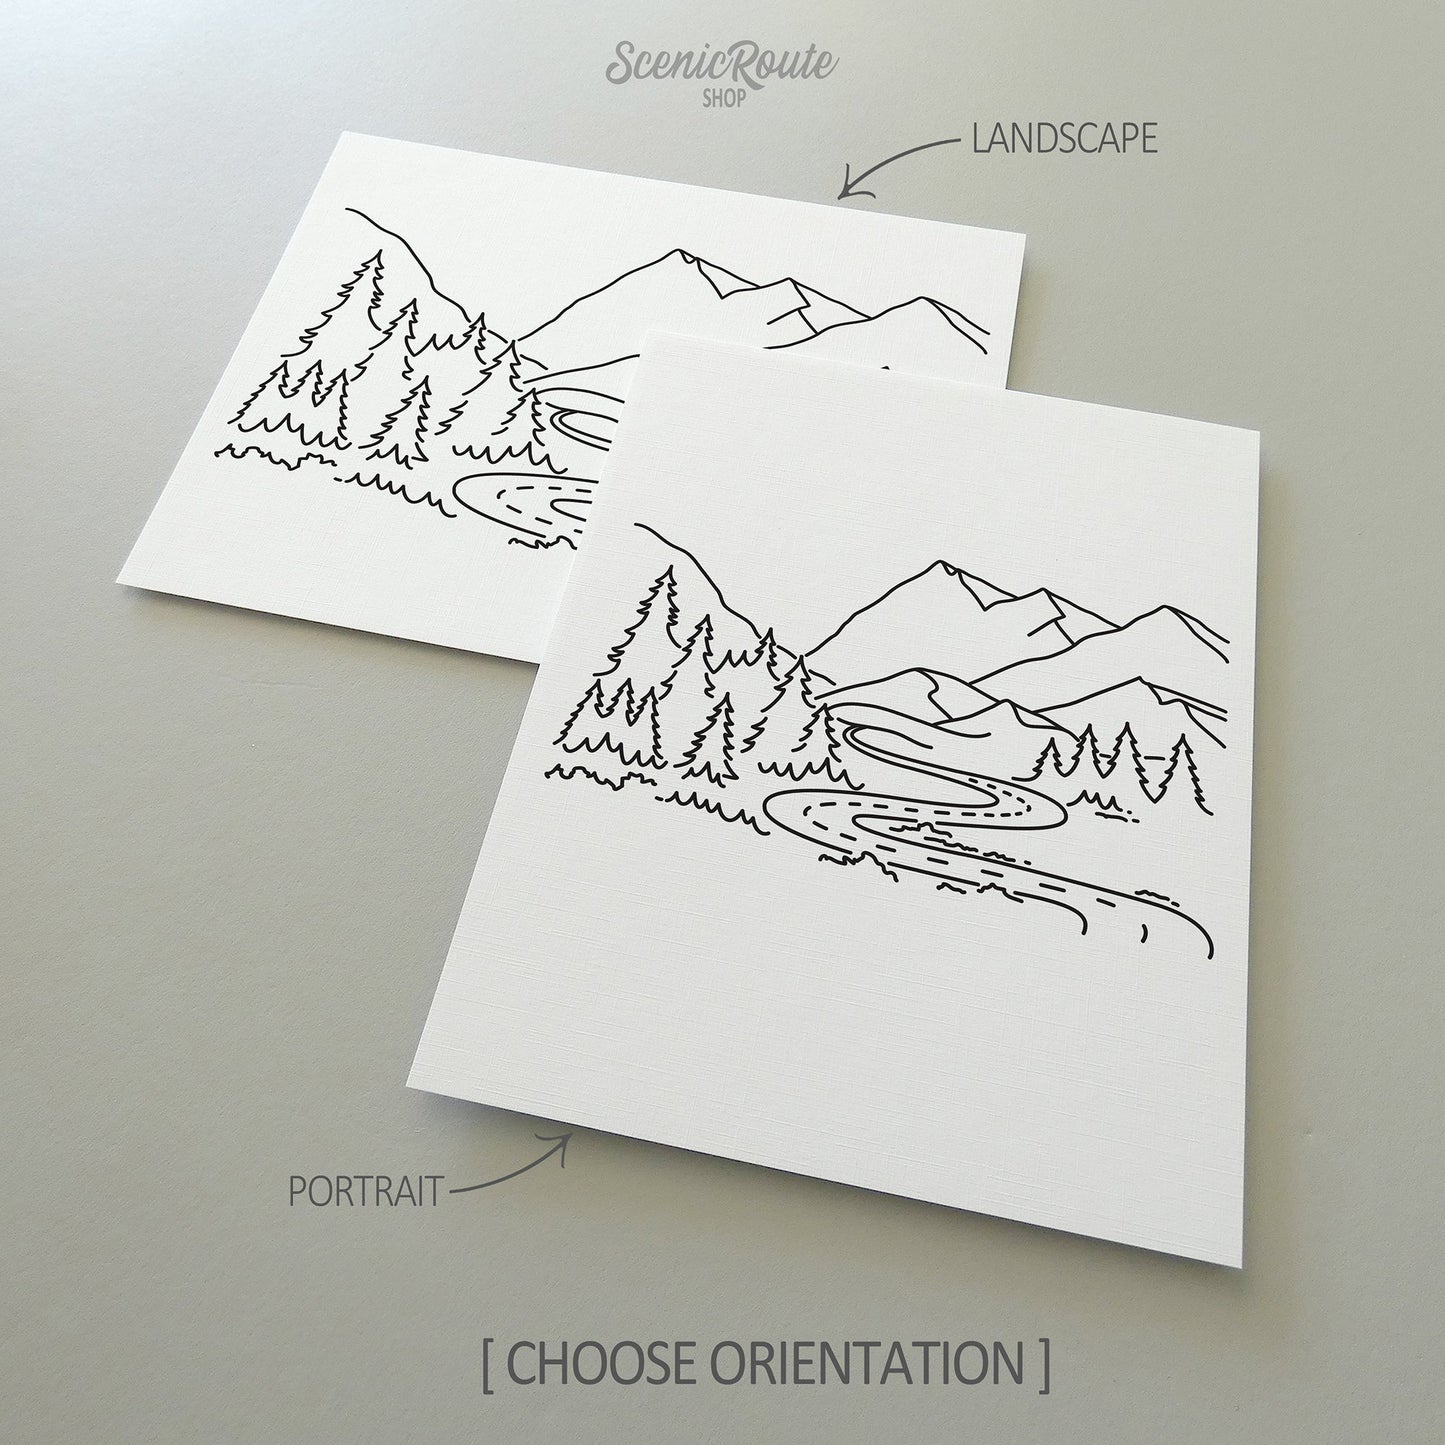 Two line art drawings of the Adventure Mountain Road Drawing on white linen paper with a gray background.  The pieces are shown in portrait and landscape orientation for the available art print options.